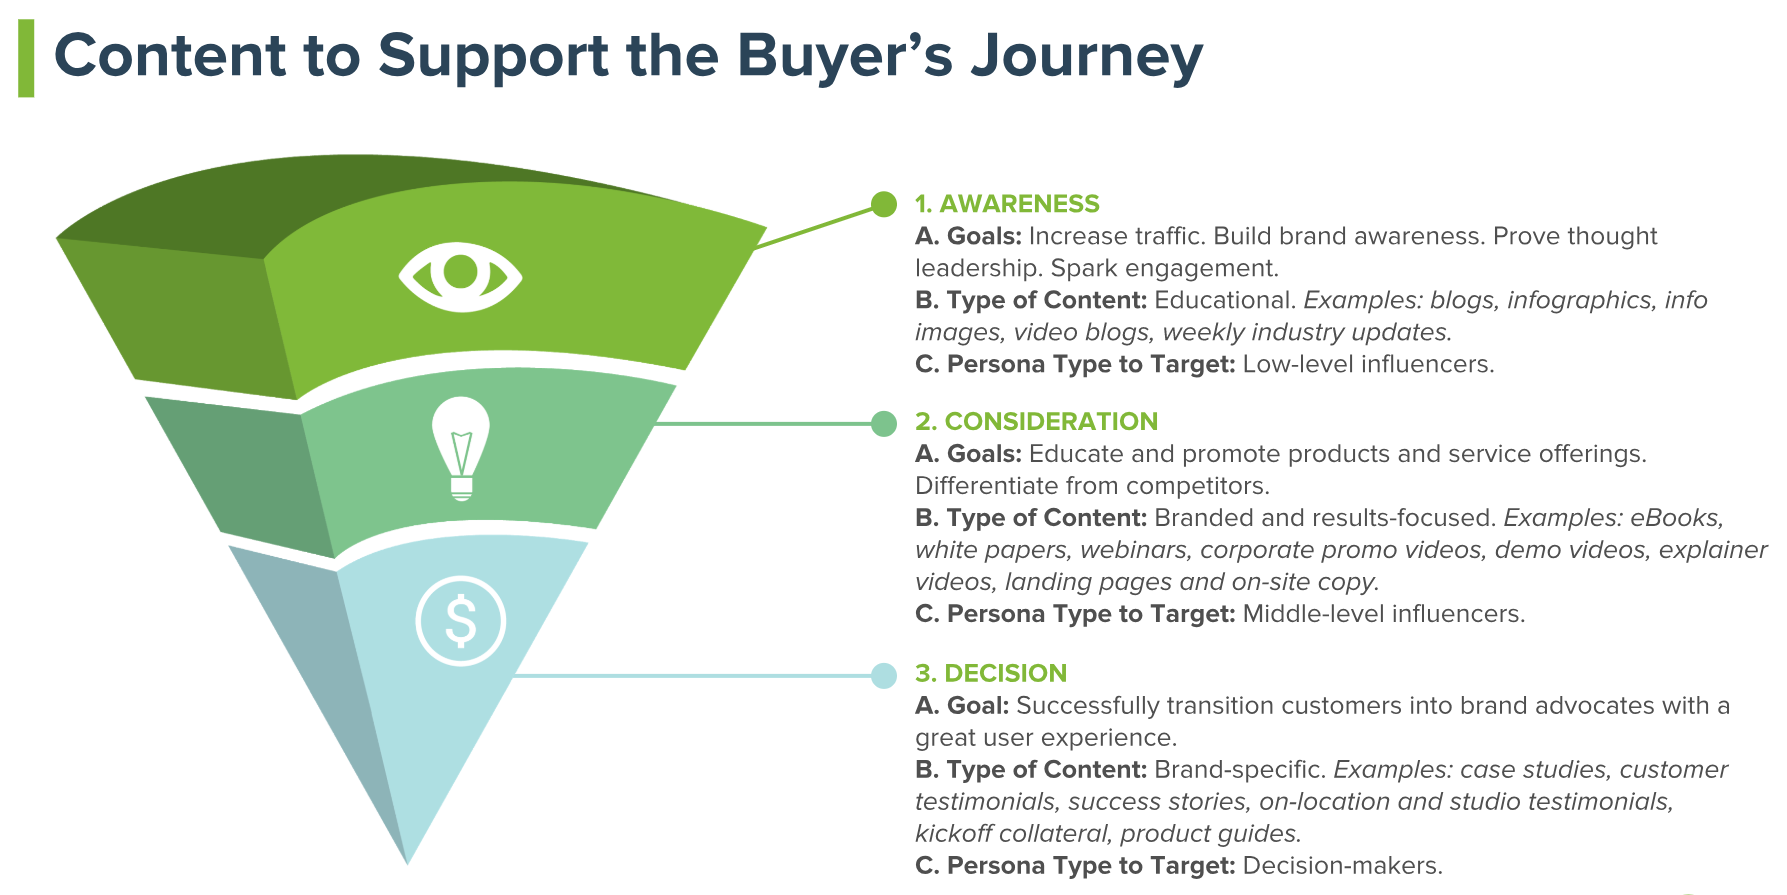 content to support the buyer's journey